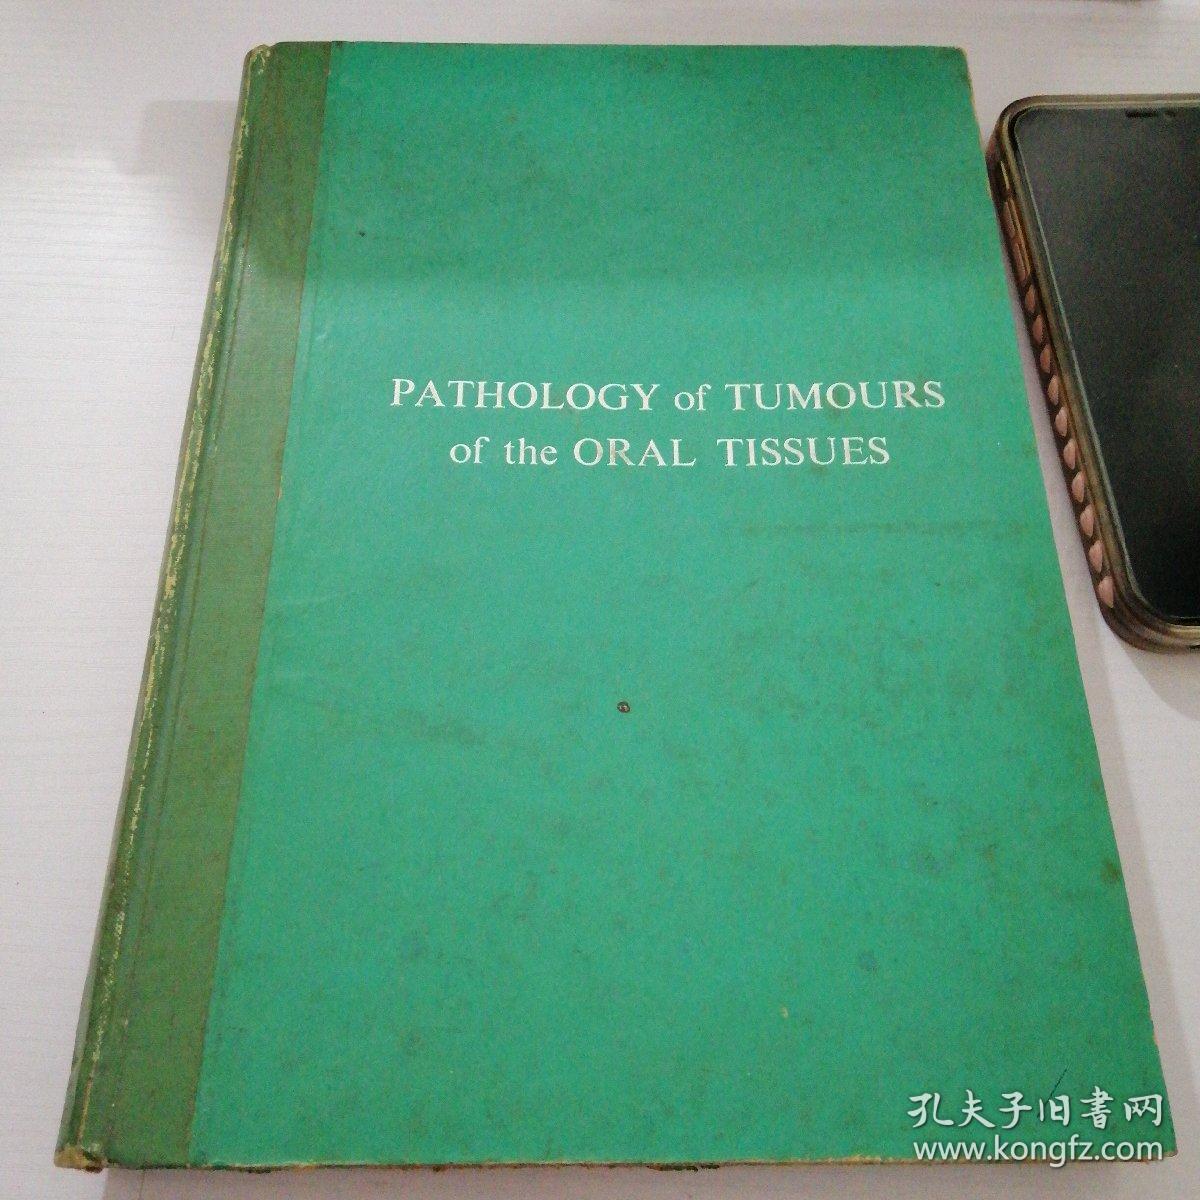 PATHOLOGY OF TUMOURS OF THE ORAL TISSUES